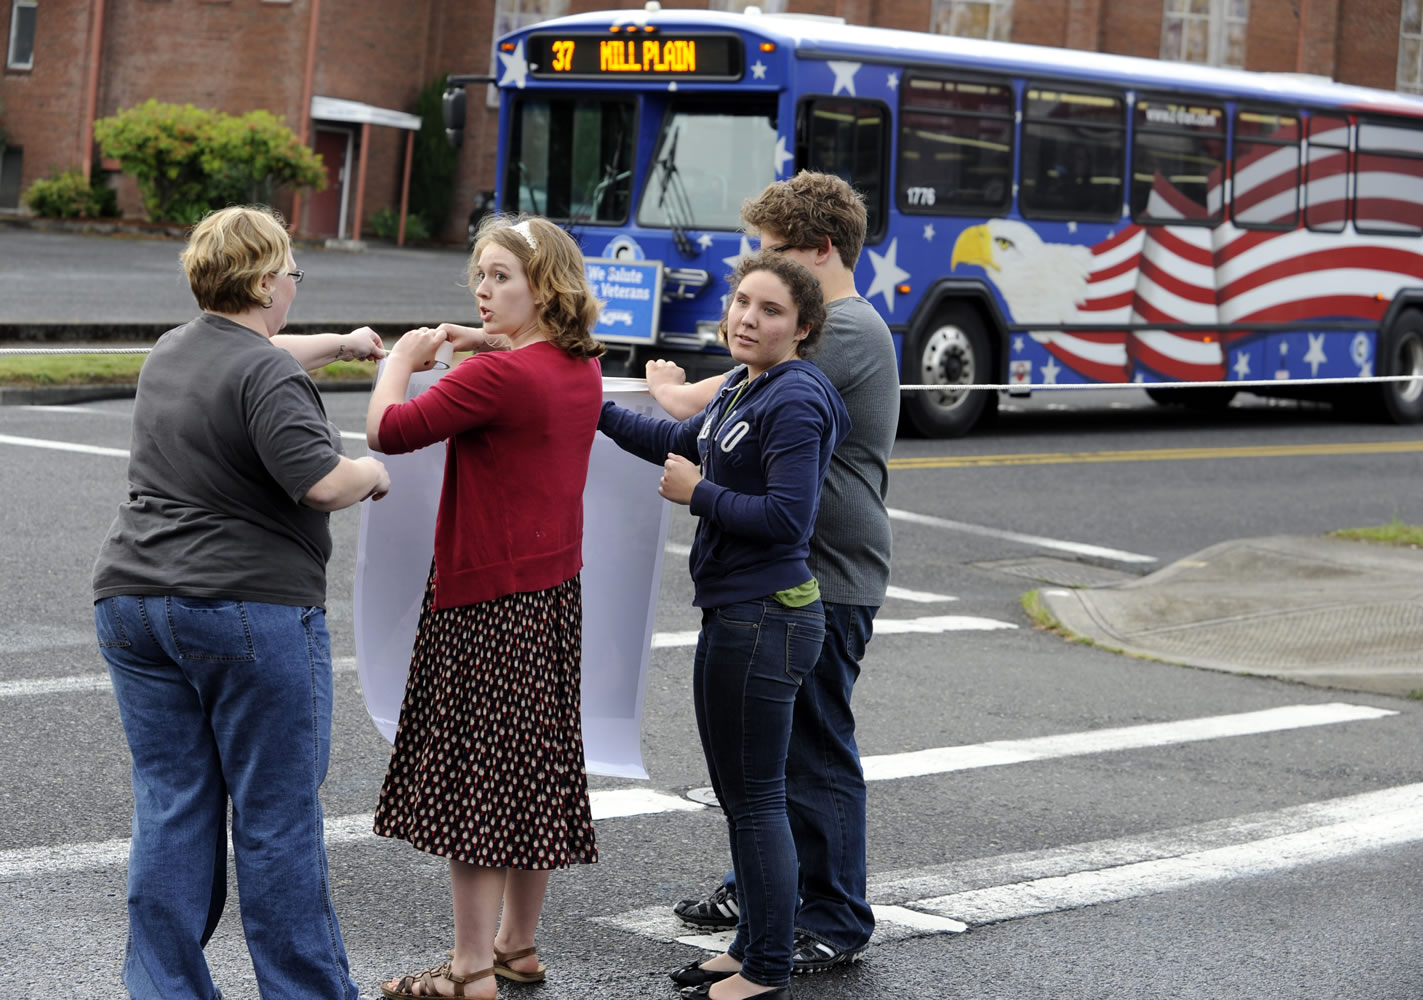 Brooklyn Newcomb, second left, the sister of Benjamin Fulwiler, assisted by Jennie Stanavech, left, blocks a C-Tran bus with a rope during a vigil on what would have been his 12th birthday.